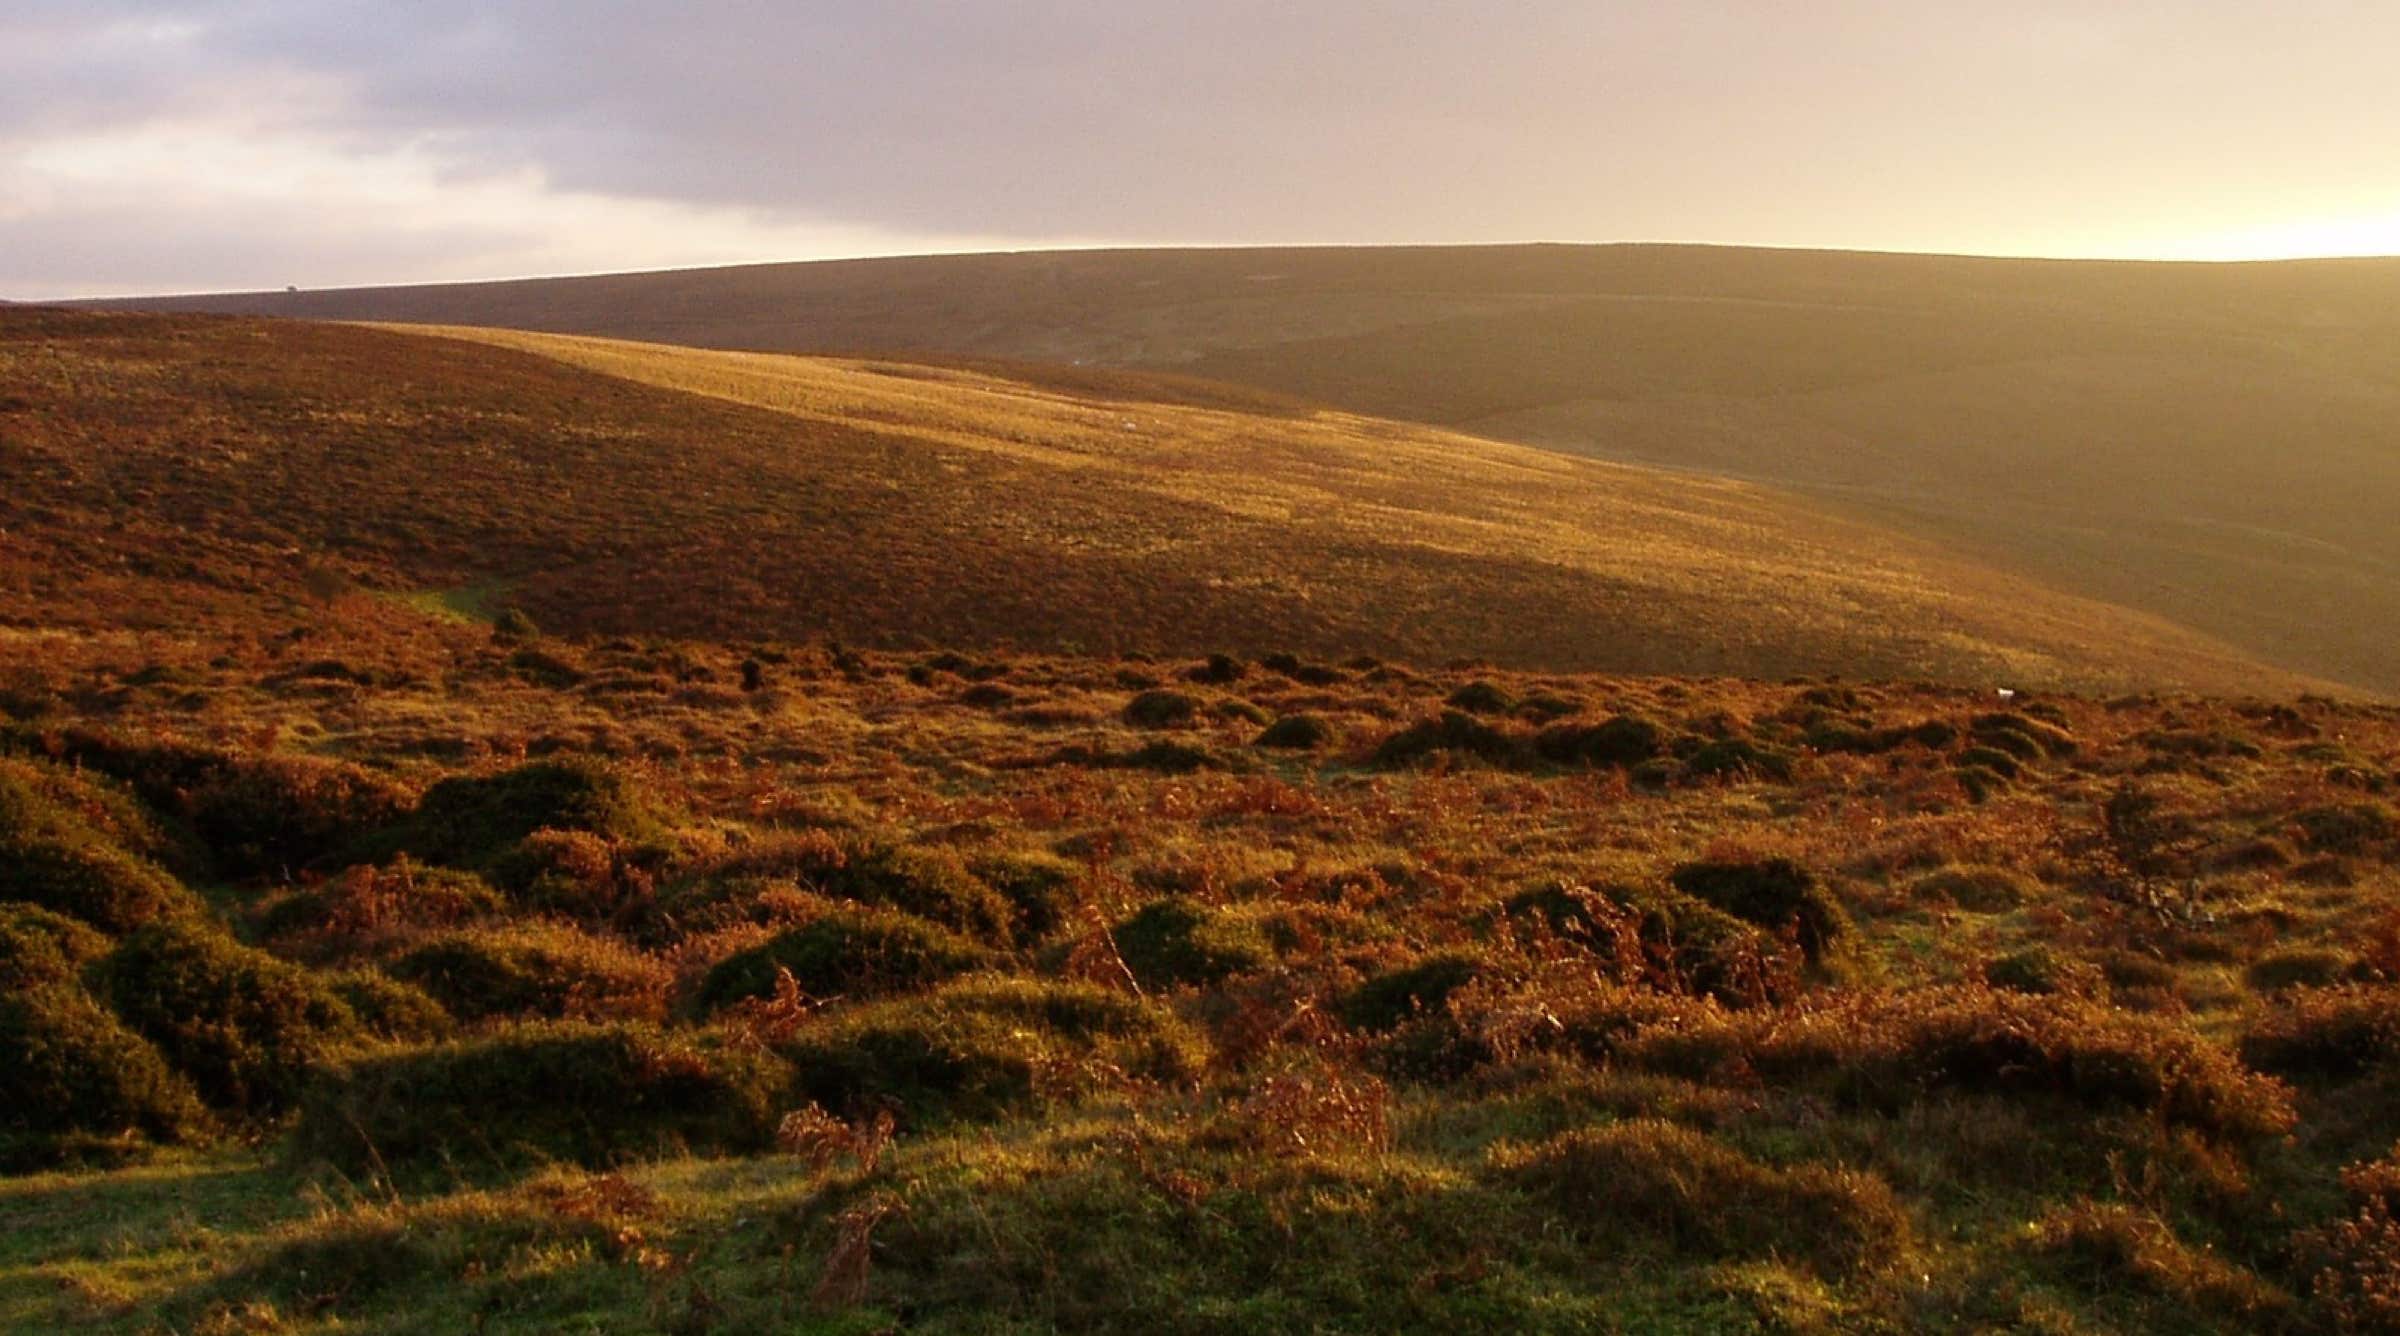 Quantock Hills, Somerset, an area served by Calder Mullis Family Solicitors.